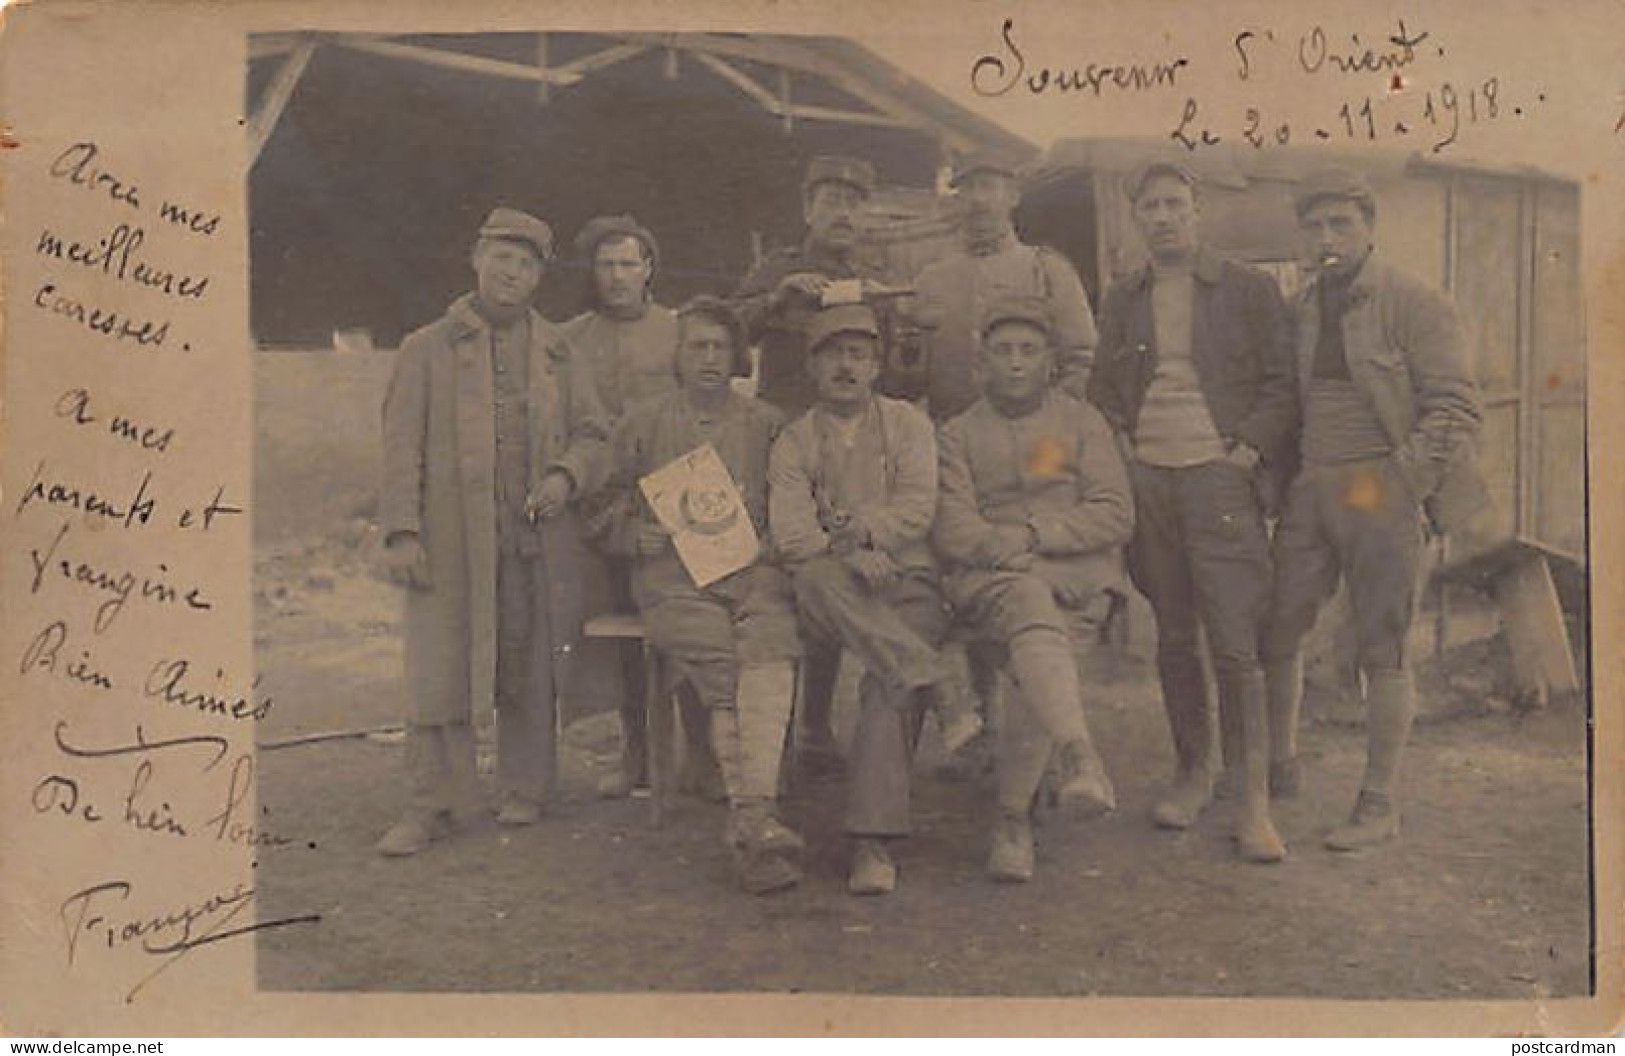 Greece - SALONICA - Group Of French Soldiers Celebrating The Armistice - REAL PHOTO - Publ. Unknown  - Grèce